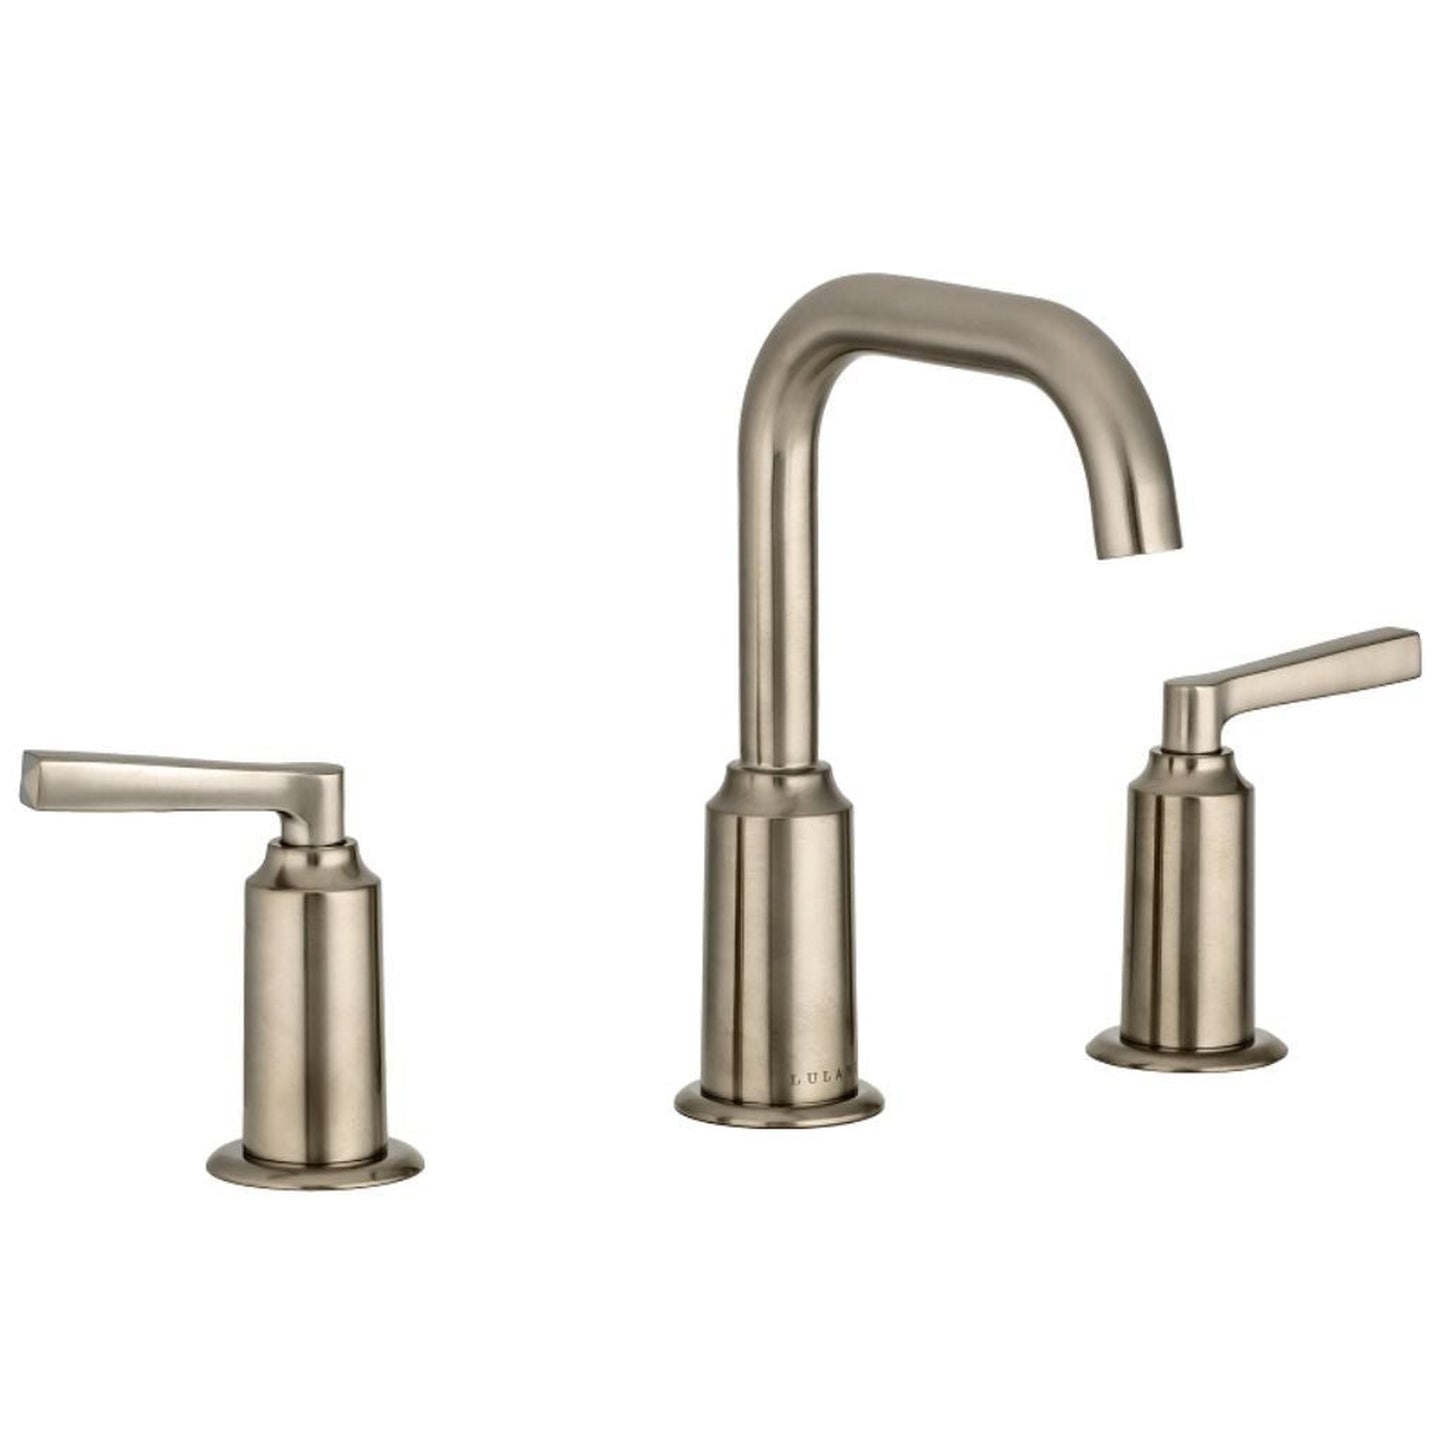 Lulani St. Lucia 8" Widespread Brushed Nickel Bathroom Faucet